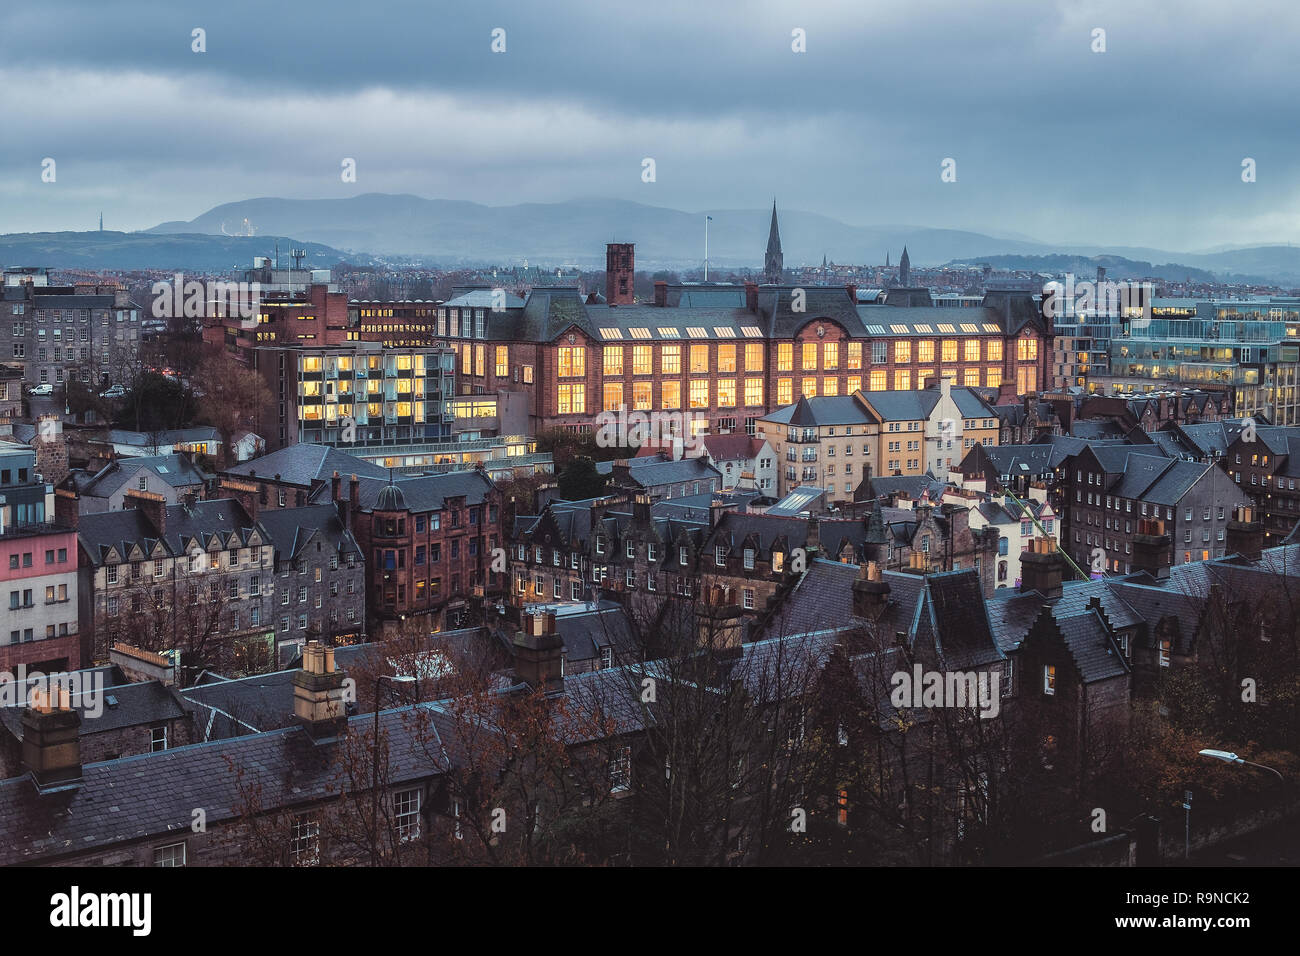 Top view of the night city of Edinburgh, rooftops with chimneys, burning windows and a building Edinburgh College of Art. December 2018. United Kigdom Stock Photo